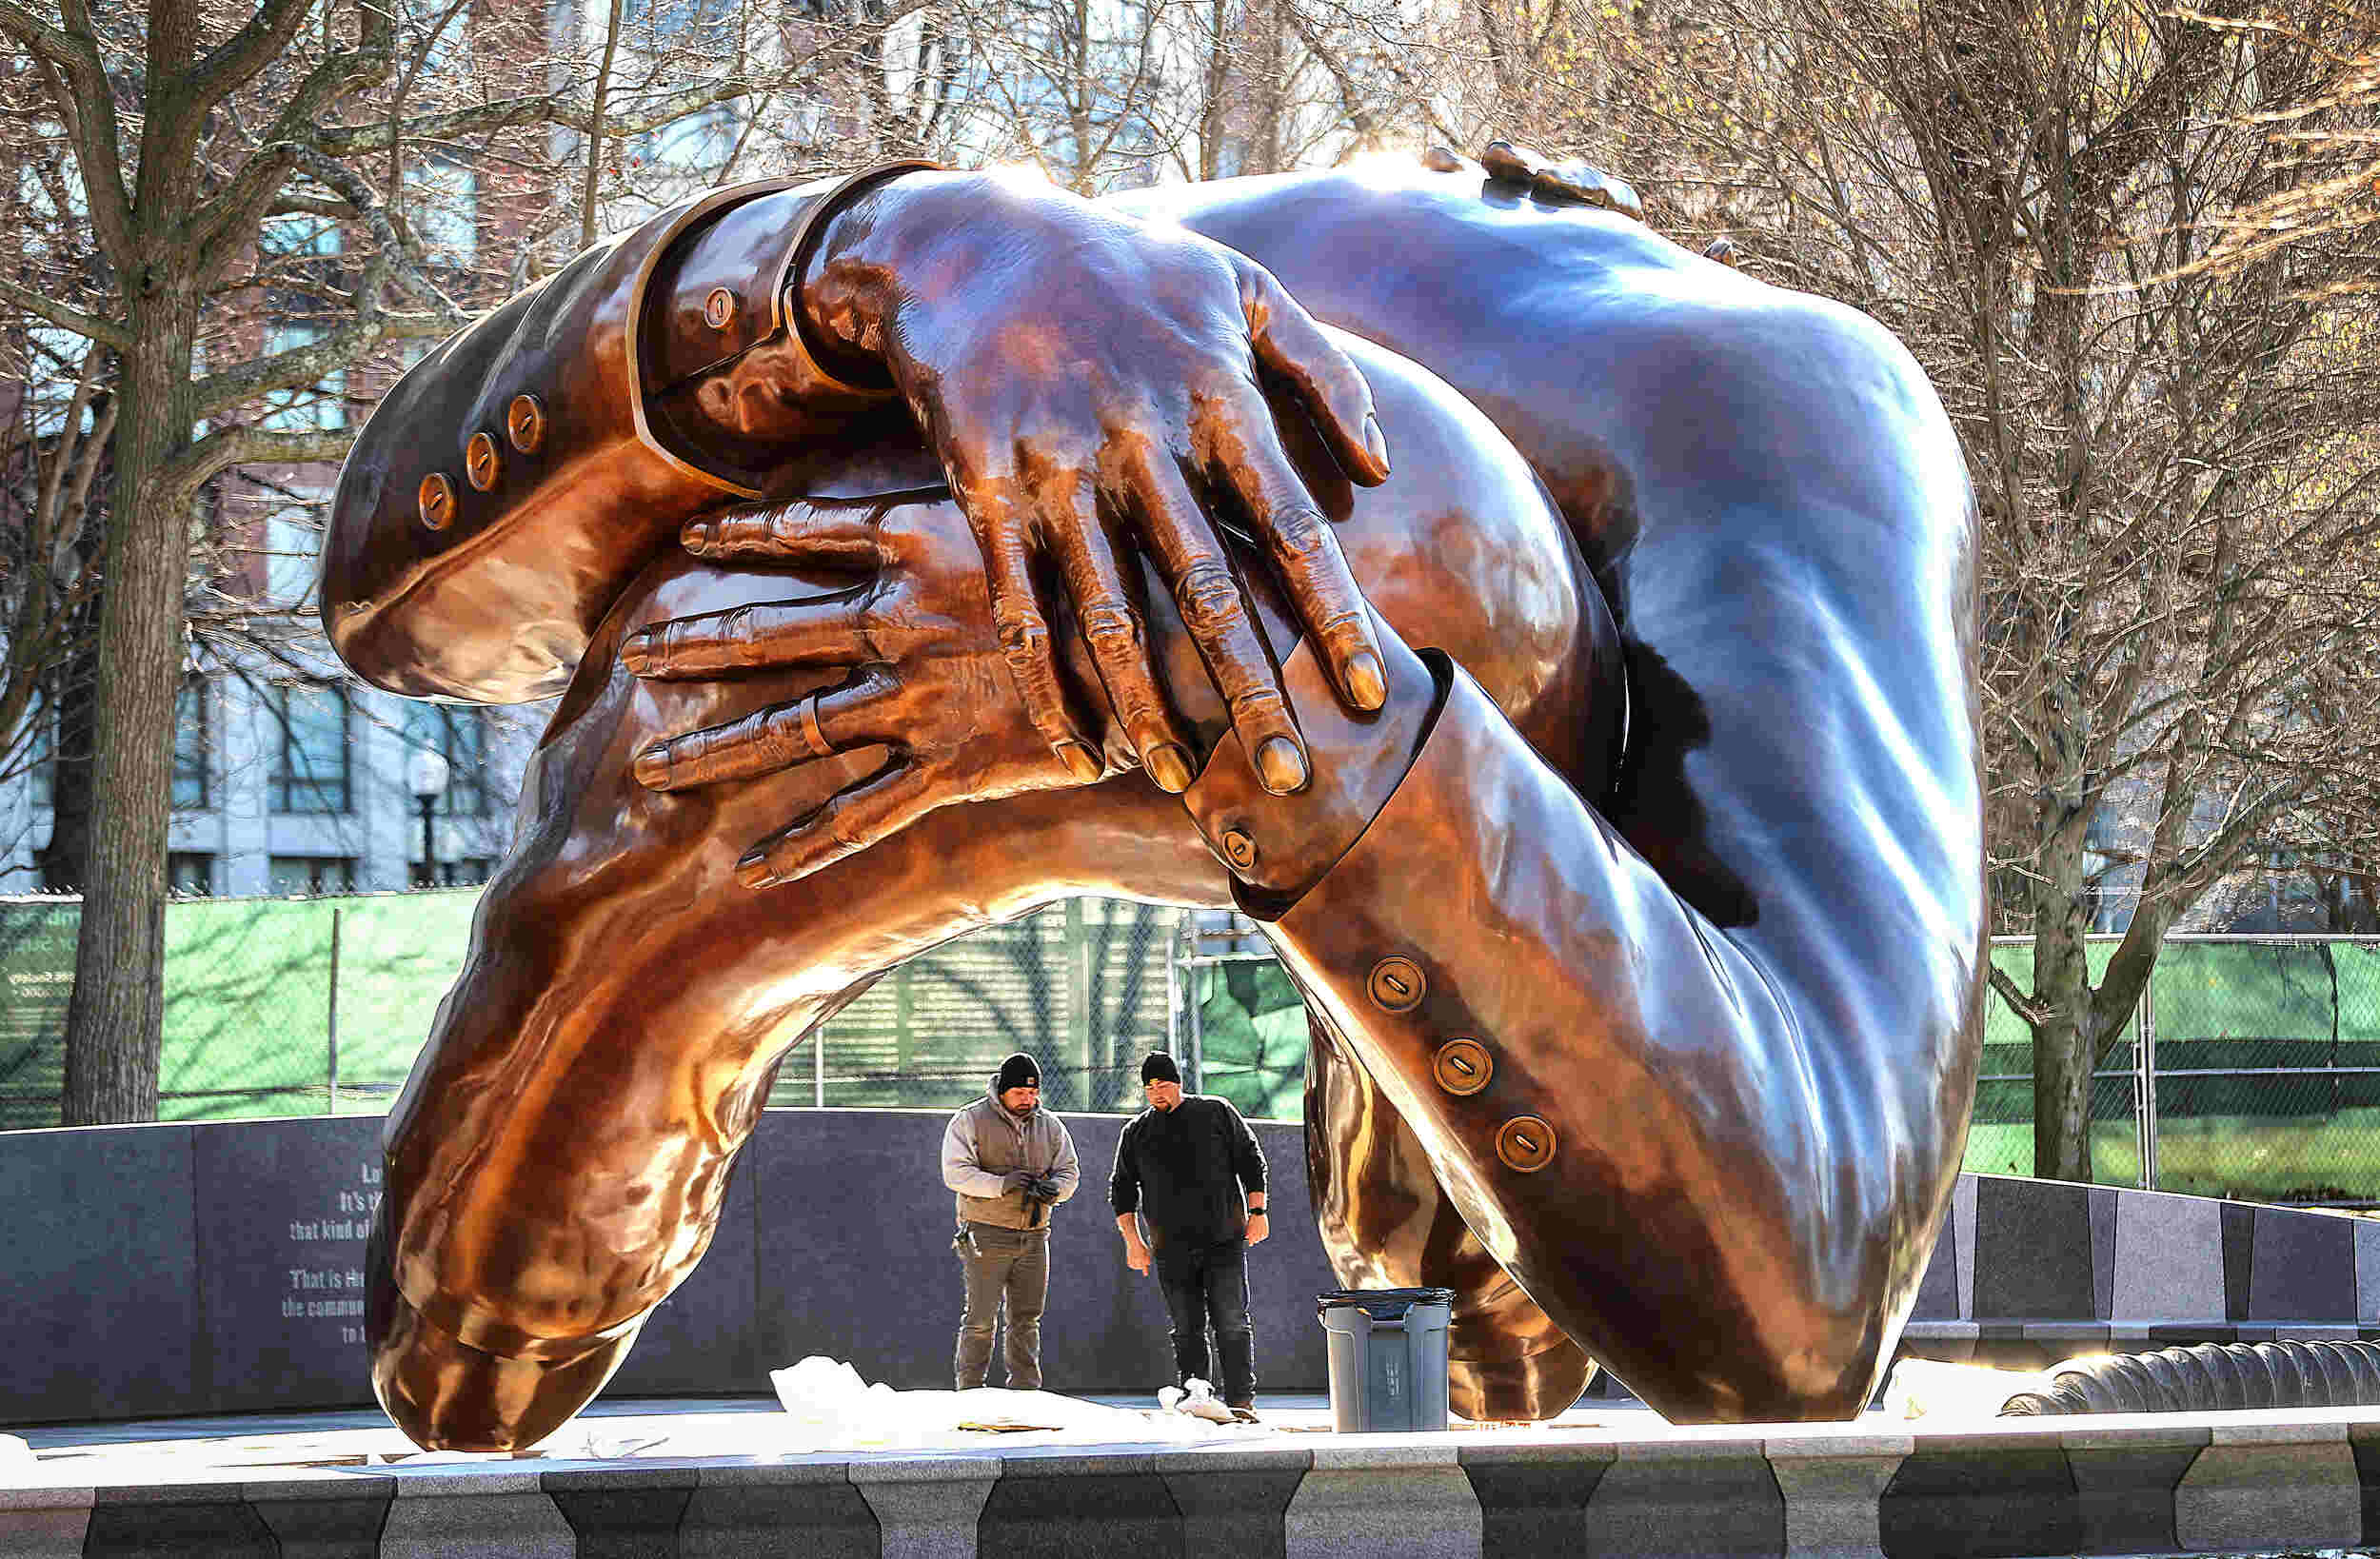 Who Made The Embrace Sculpture?